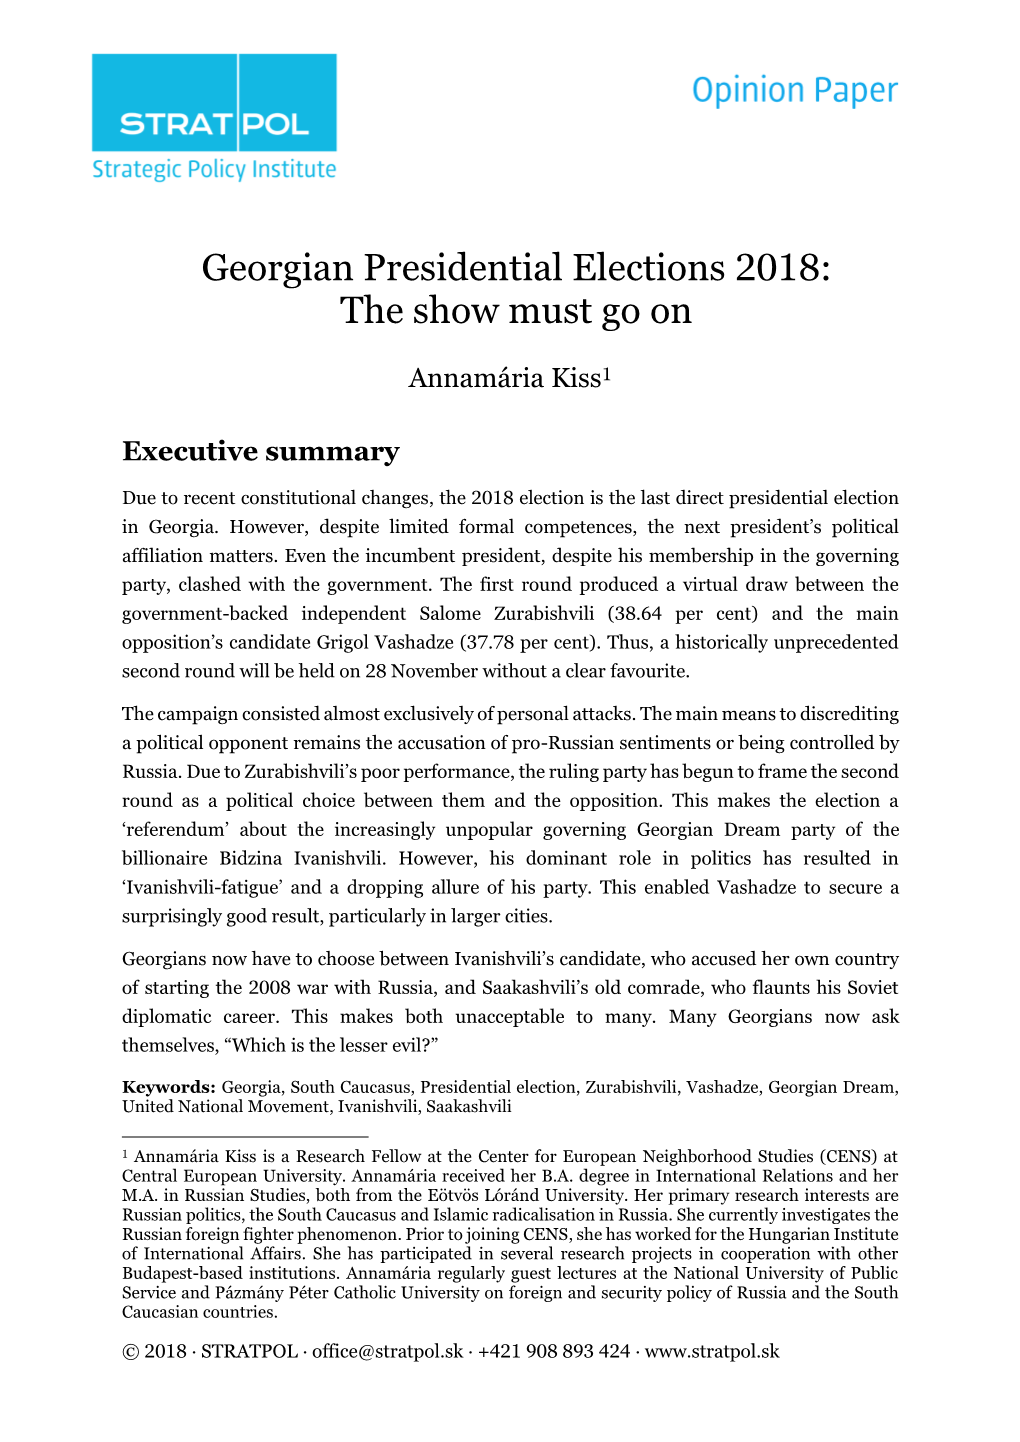 Georgian Presidential Elections 2018: the Show Must Go On